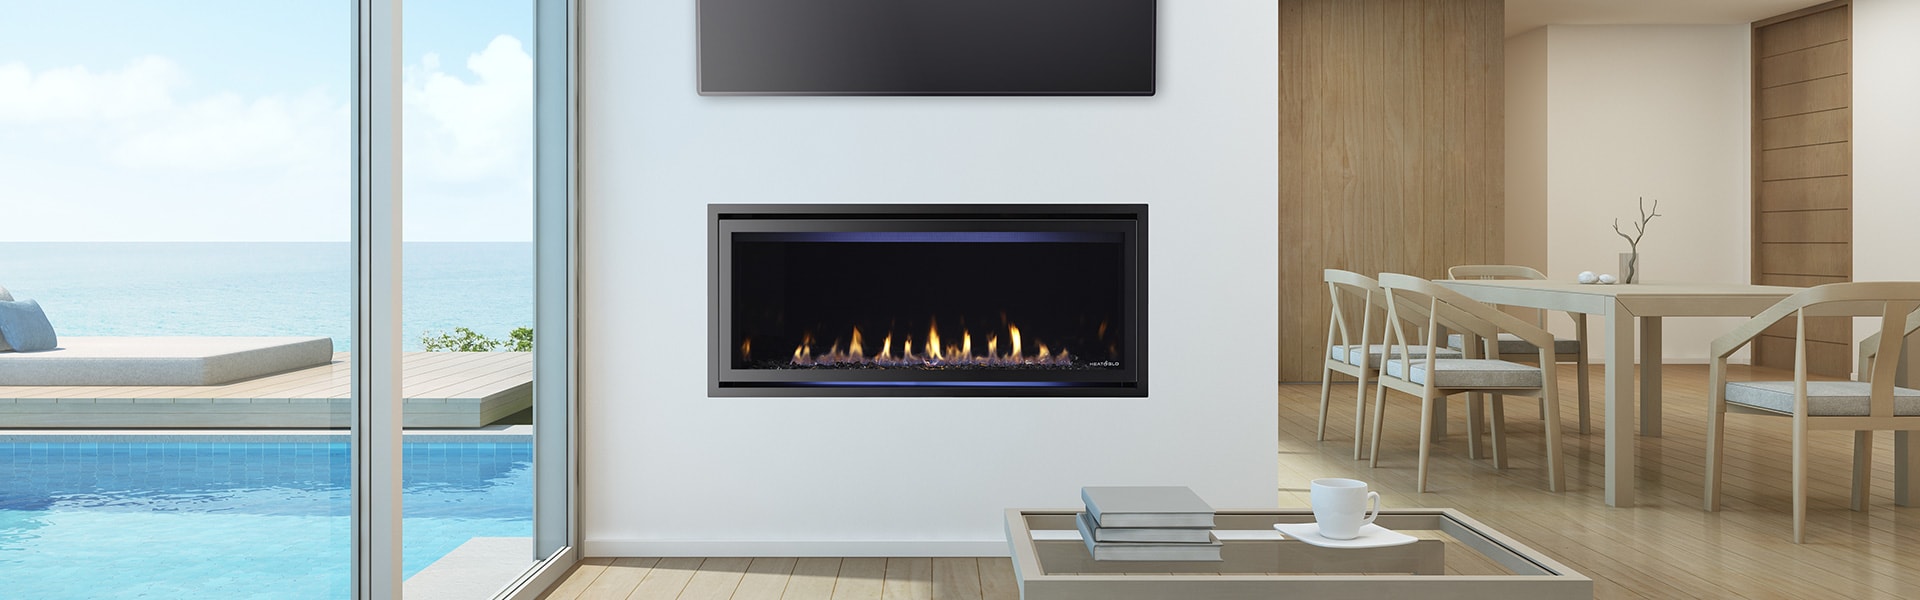 Heat and Glo Fireplace Inserts Elegant Cosmo 42 Gas Fireplace